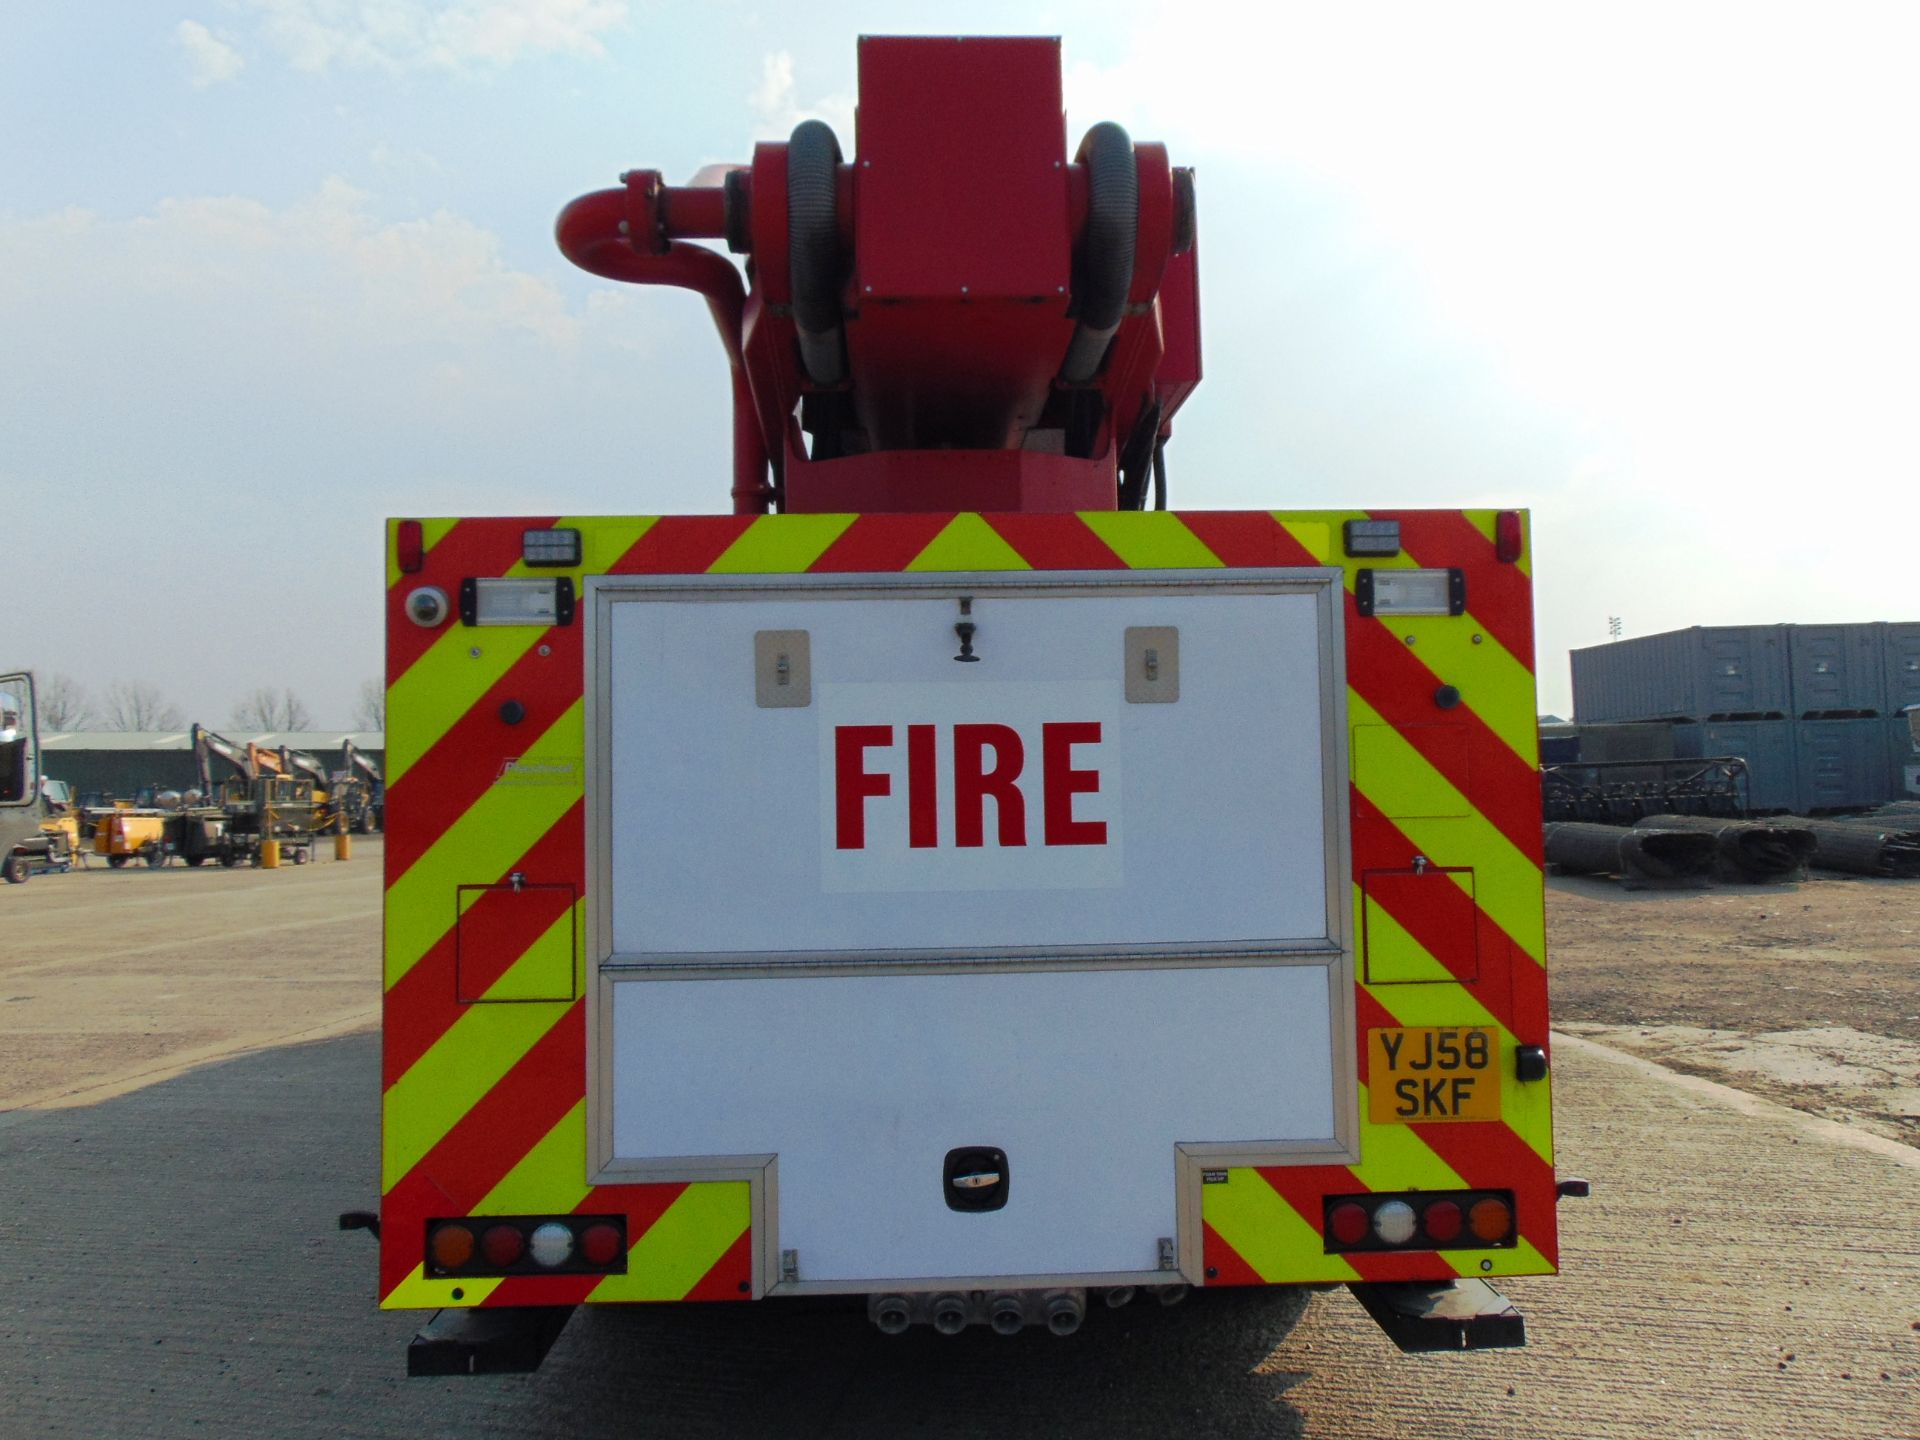 2008 Mercedes Econic CARP (Combined Aerial Rescue Pump) 6x2 Aerial Work Platform / Fire Appliance - Image 25 of 49